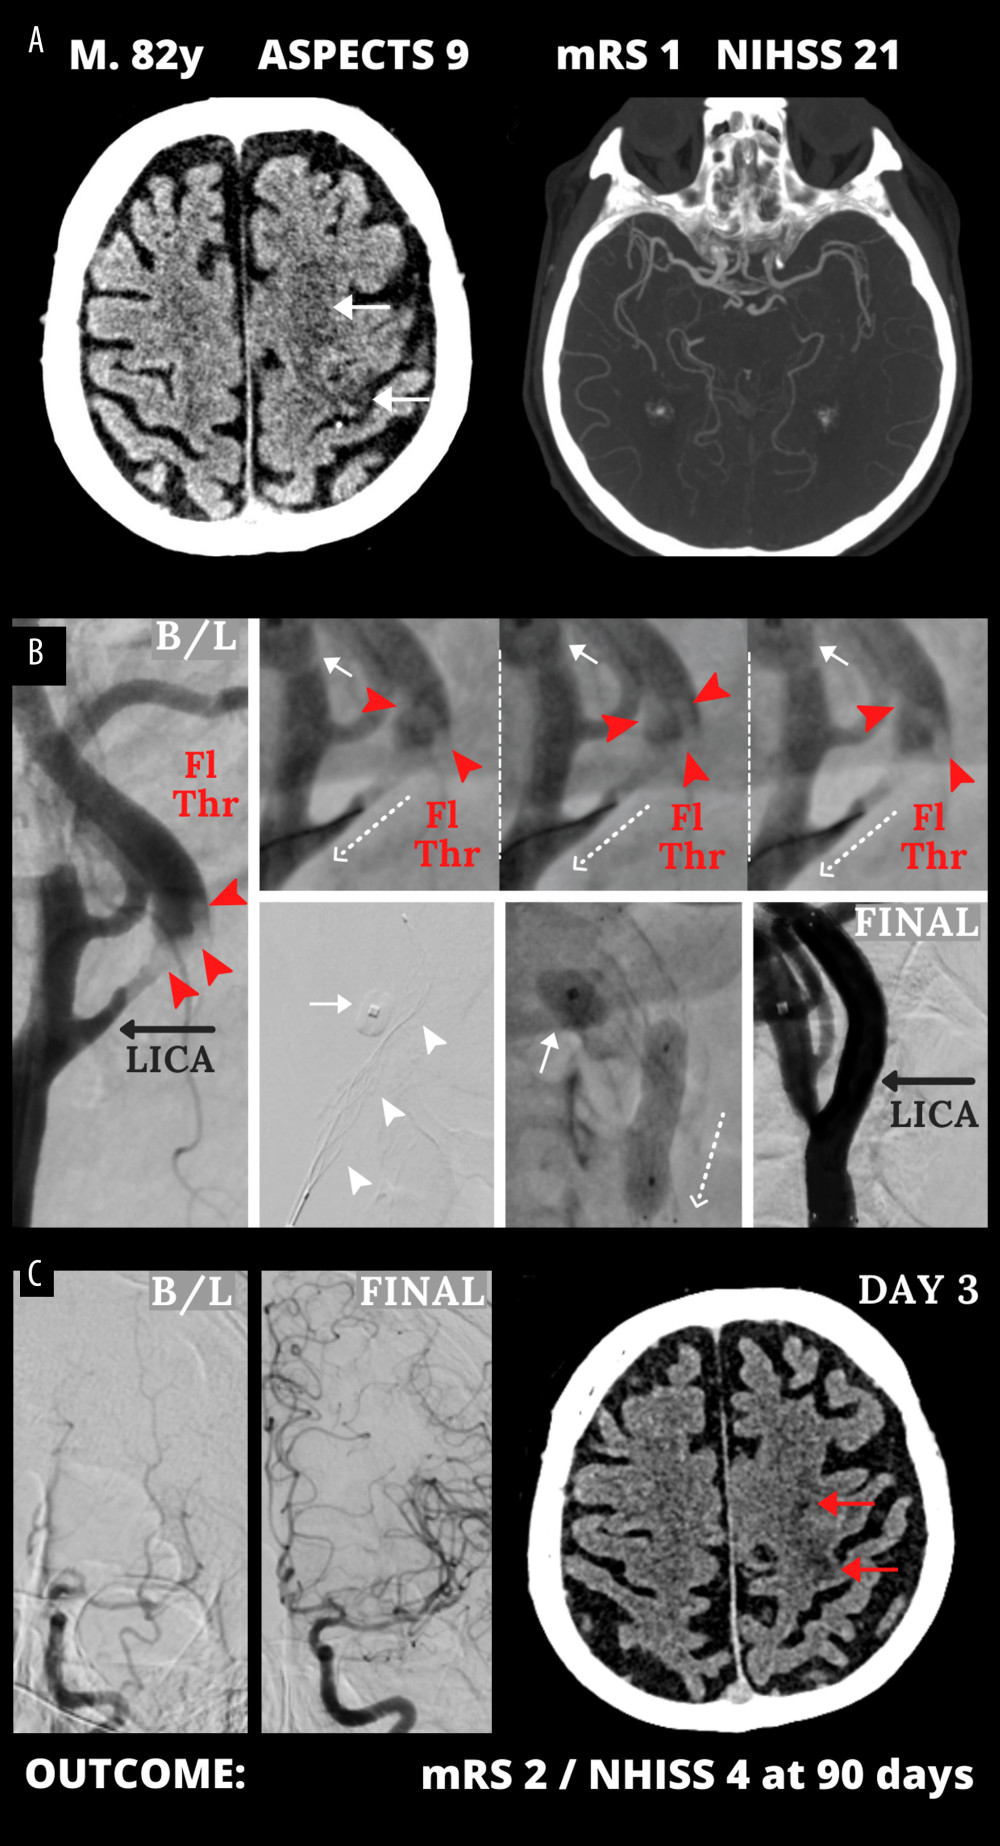 Emergency mechanical reperfusion in acute carotid artery origin ischemic stroke. (A), (left panel) – mild vascular changes (white arrows) seen on admission cerebral computed tomography Alberta Stroke Program Early Computed Tomography Score (ASPECTS) 9 in a patient who was emergency-transferred to a cardioangiology-based Thrombectomy-Capable Stroke Center from external Neurology; (right panel) – diminished flow to the left hemisphere on computed tomography angiography (compare left vs right). (B) Catheter angiography – left internal carotid artery (LICA) near-occlusion with a floating thrombus (Fl Thr, red arrowheads) and next stages of emergency mechanical reperfusion (from left to right, upper and lower panels): transient flow reversal (dotted arrows; enhanced by active aspirations at the procedure critical steps) – proximal cerebral protection device – Mo.Ma (Medtronic, Tolochenaz, Switzerland), external carotid artery balloon (white arrow). Following thrombectomy (carotid-dedicated adjustable-diameter stentriever – TigerTrieverXL (Rapid Medical, Yokneam, Israel), the culprit lesion was sequestrated (white arrowheads), using a micronet-covered stent – C-Guard (InspireMD, Tel Aviv, Israel) with post-dilatation embedding. (C), (left panel) – effective lumen reconstruction resulted in normalized left hemispheric cerebral blood supply symptoms regressed, (right panel) – discharge cerebral computed tomography showed a minor cerebral infarct (red arrows). B/L indicates baseline, (mag) = magnified image. Figure was created with the use of Canva (Perth, Australia).